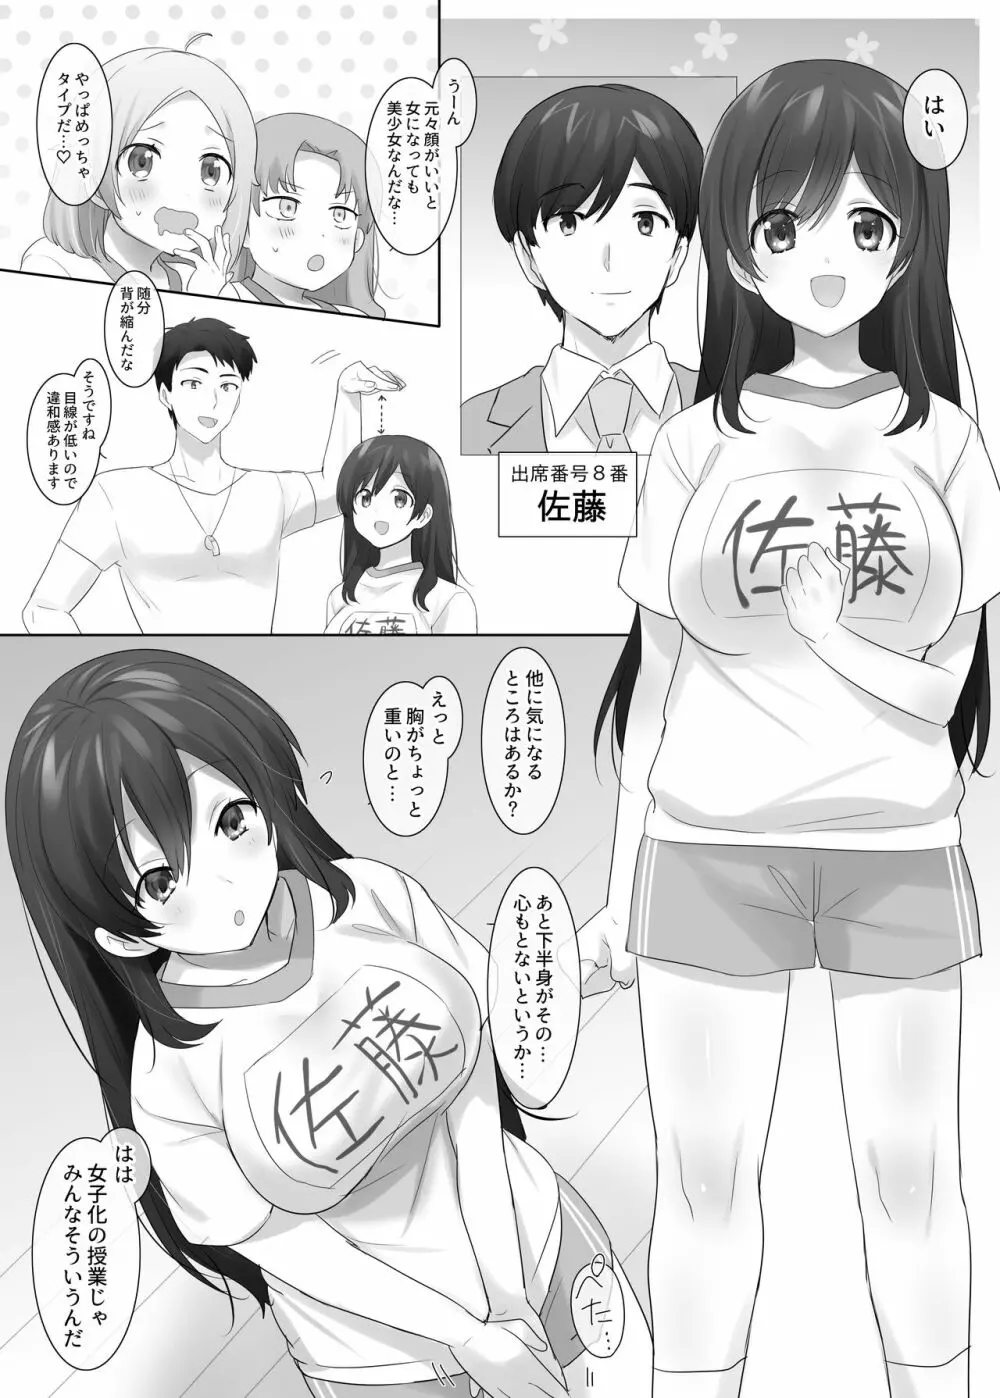 TS保健体育～クラス全員女体化授業～/佐藤くん編まとめ - page7